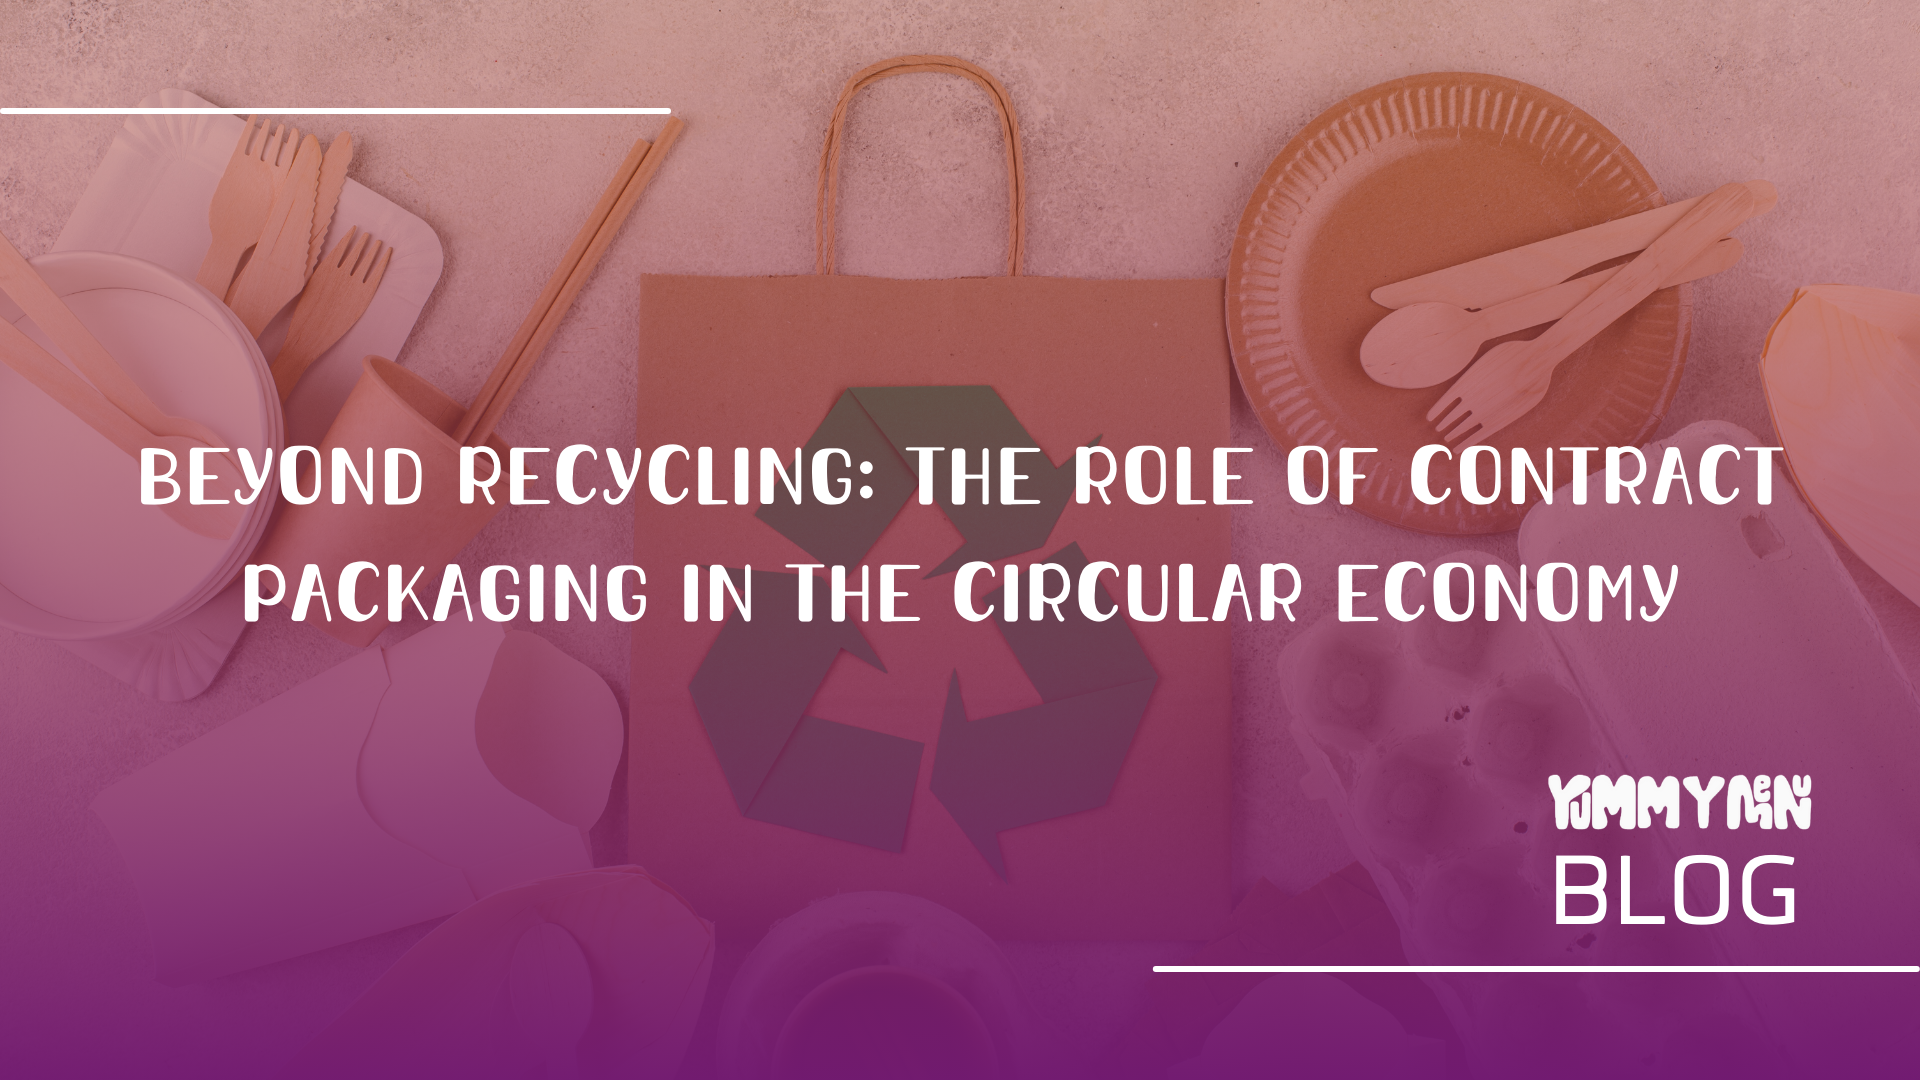 Beyond Recycling: The Role of Contract Packaging in the Circular Economy